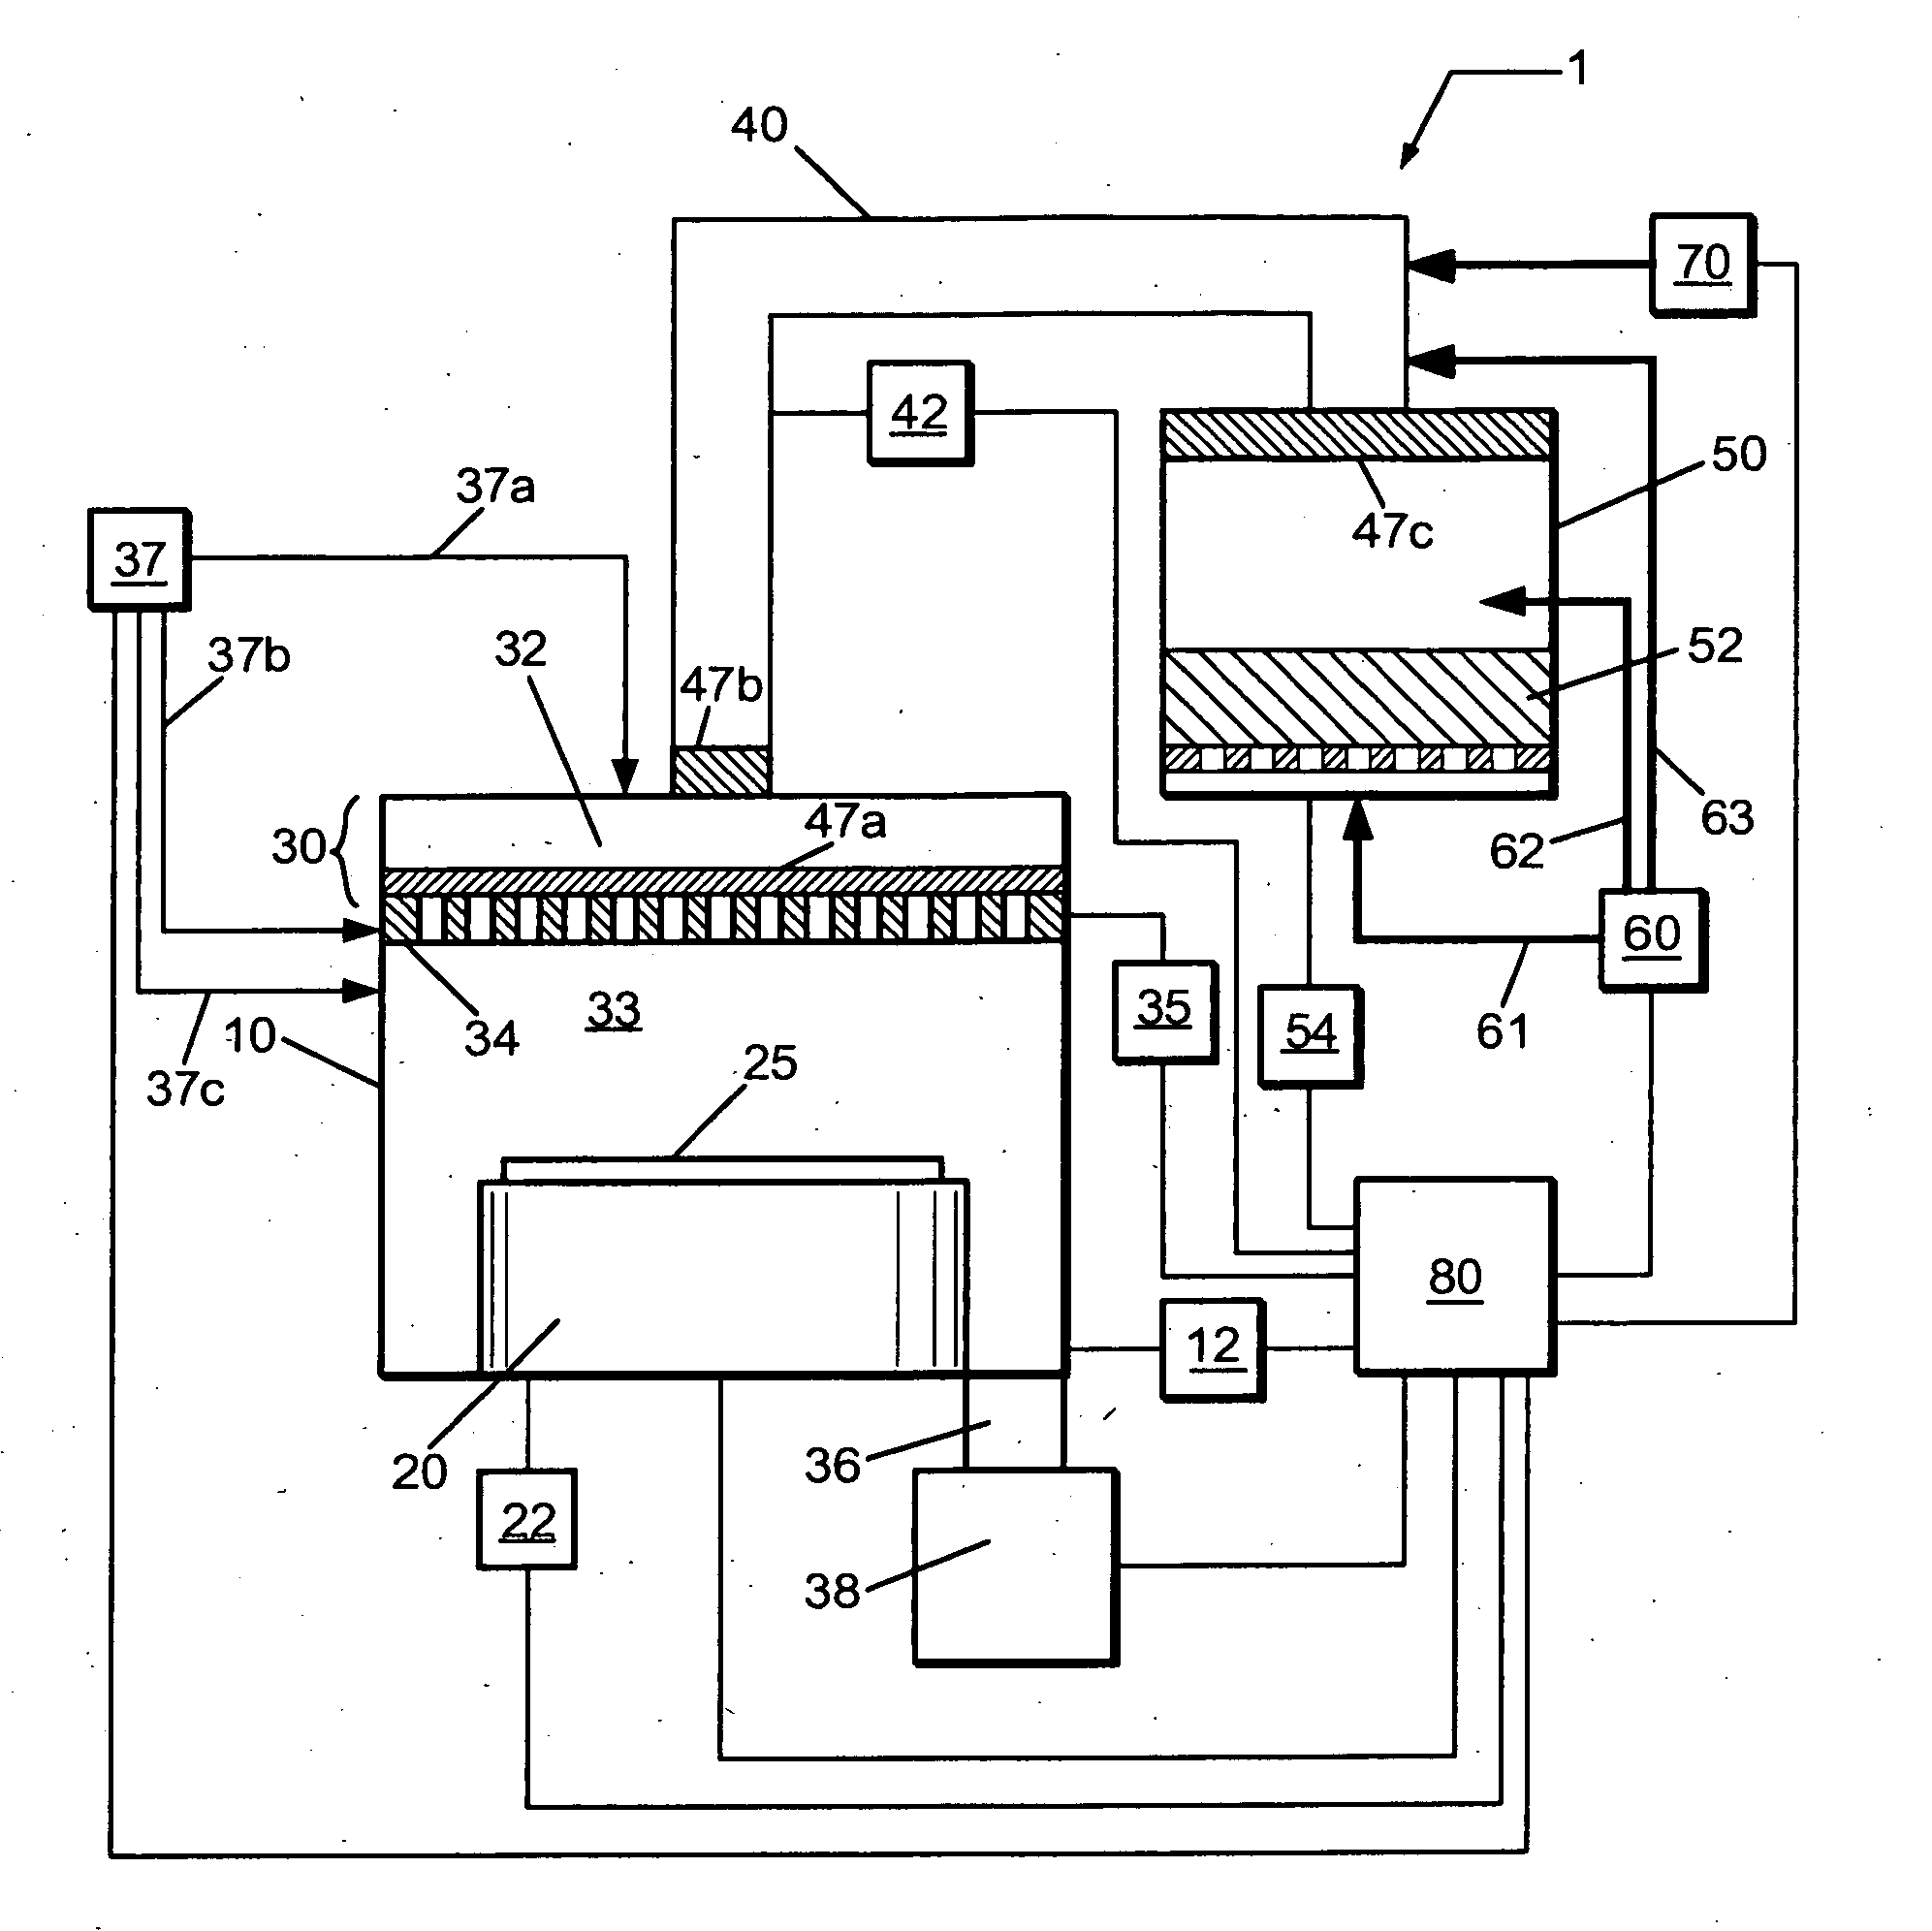 Method and apparatus for reducing particle contamination in a deposition system